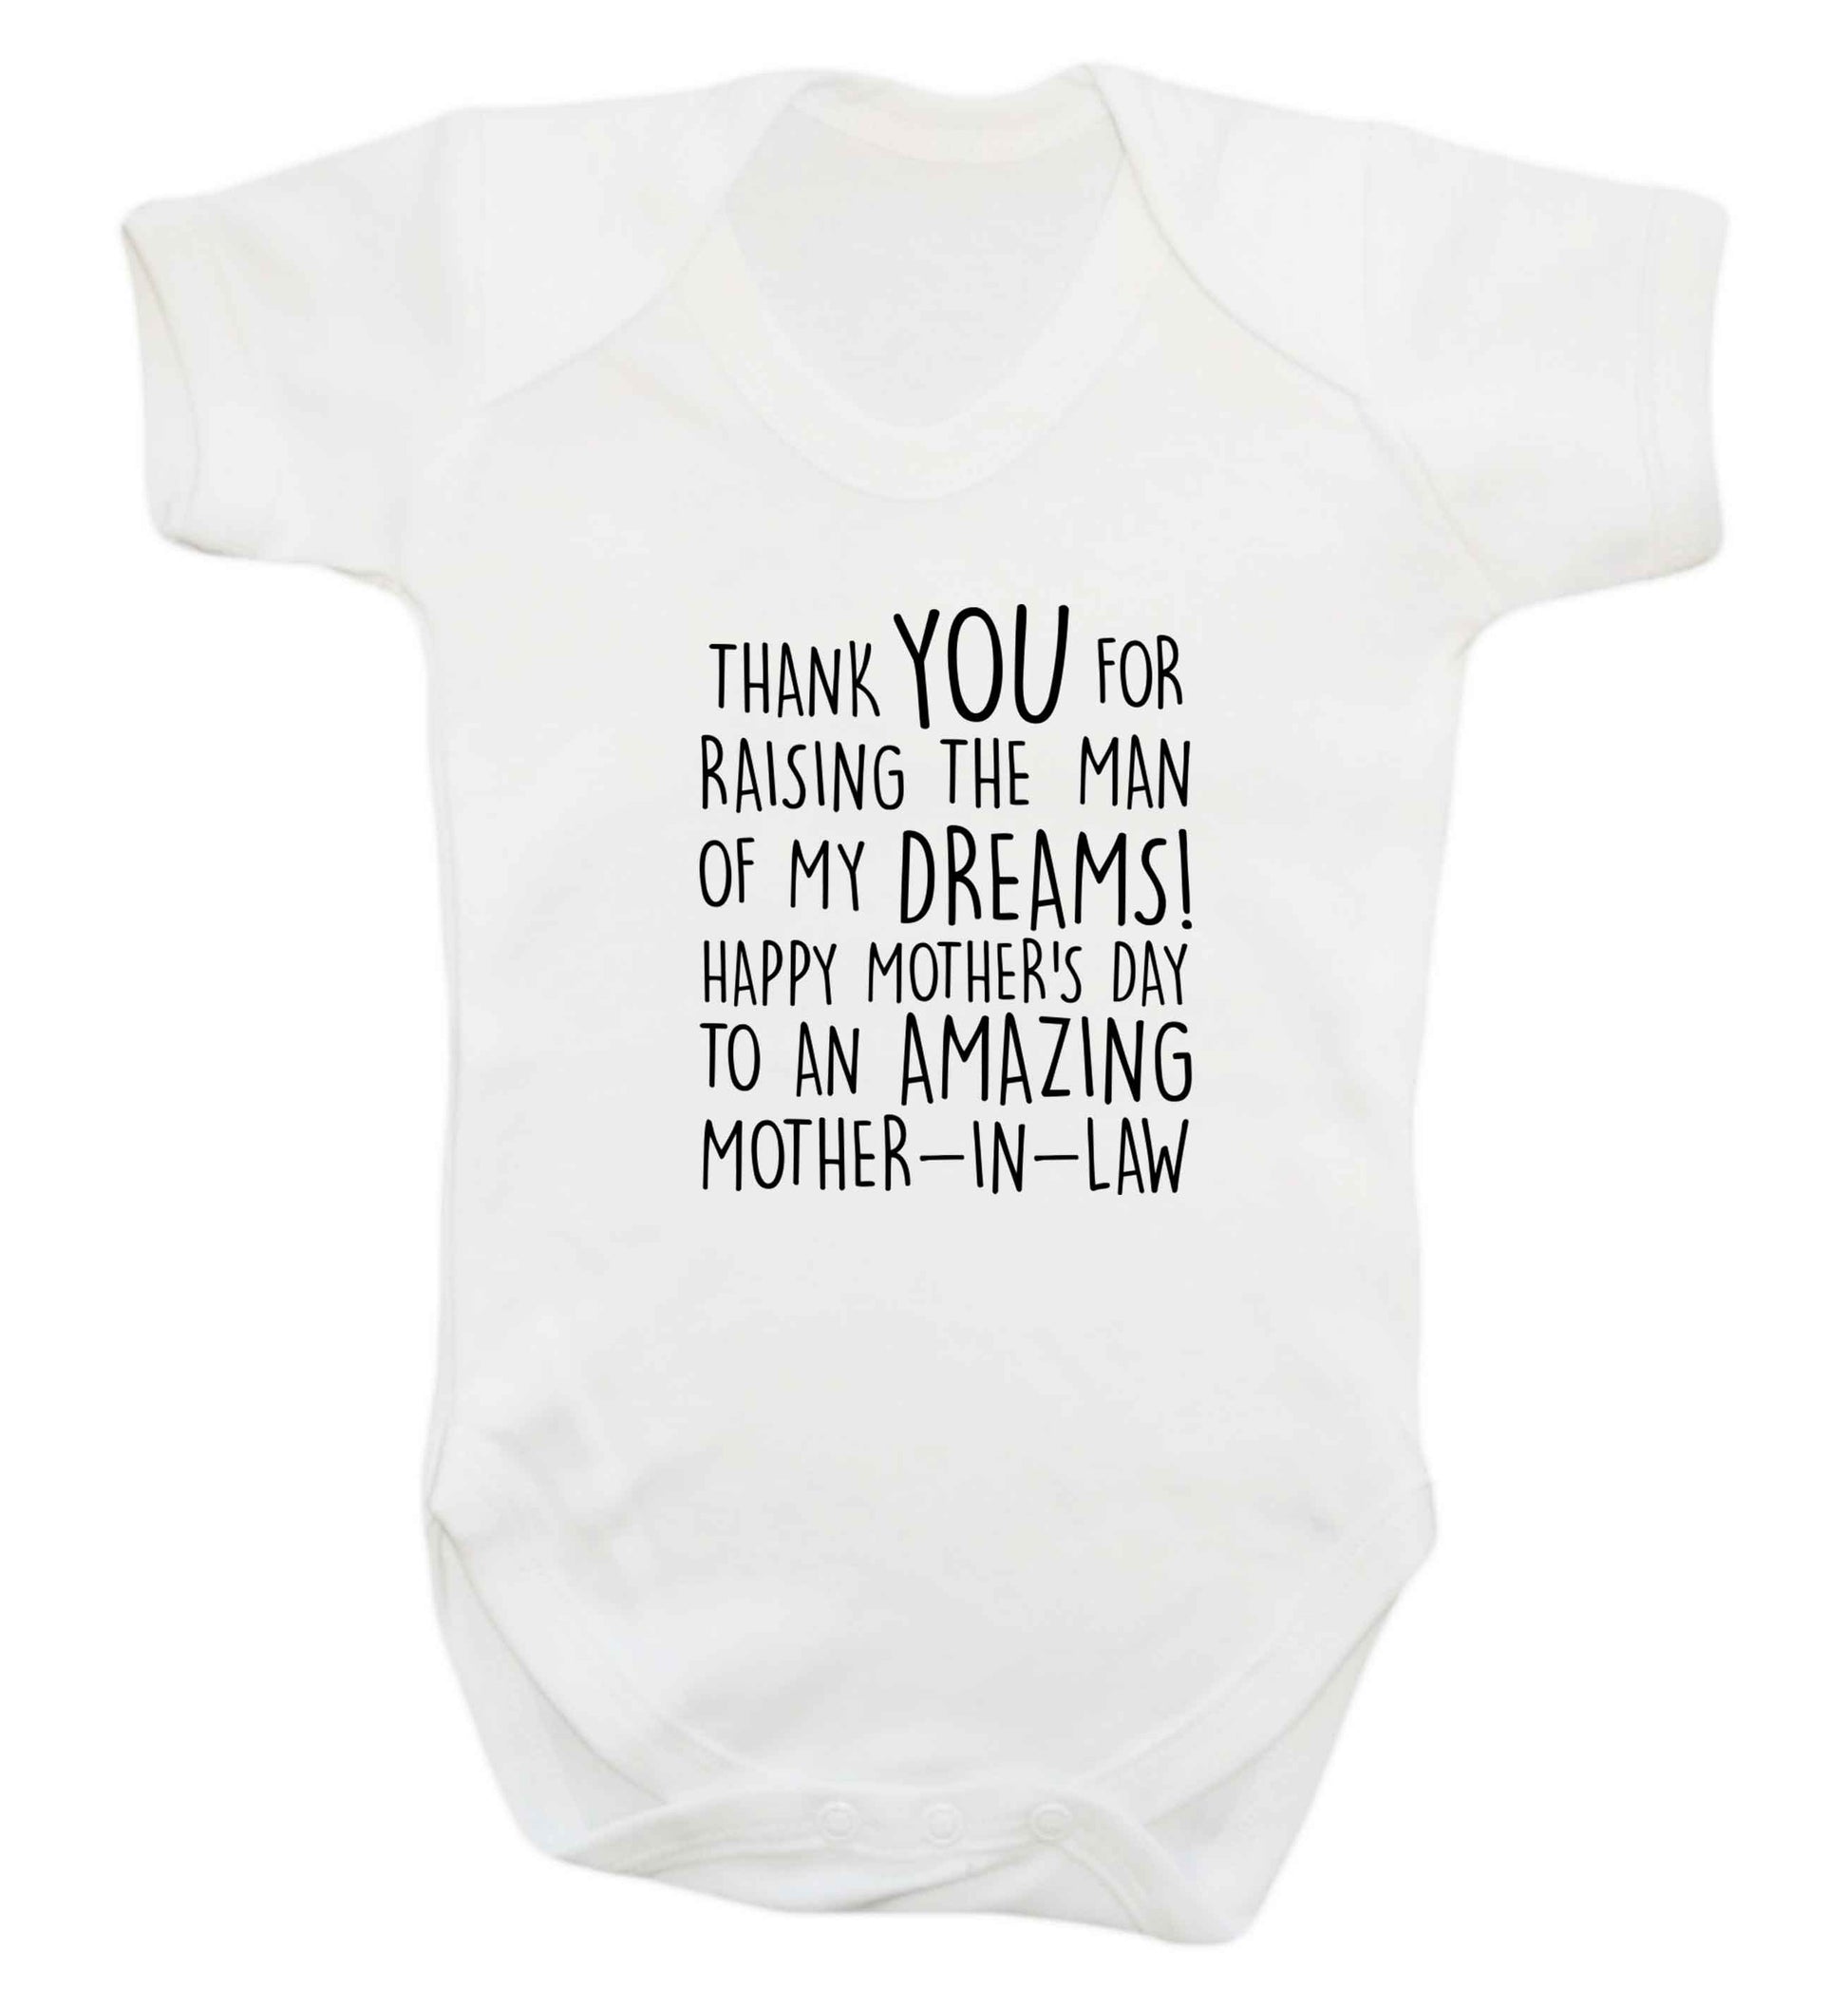 Raising the man of my dreams mother's day mother-in-law baby vest white 18-24 months